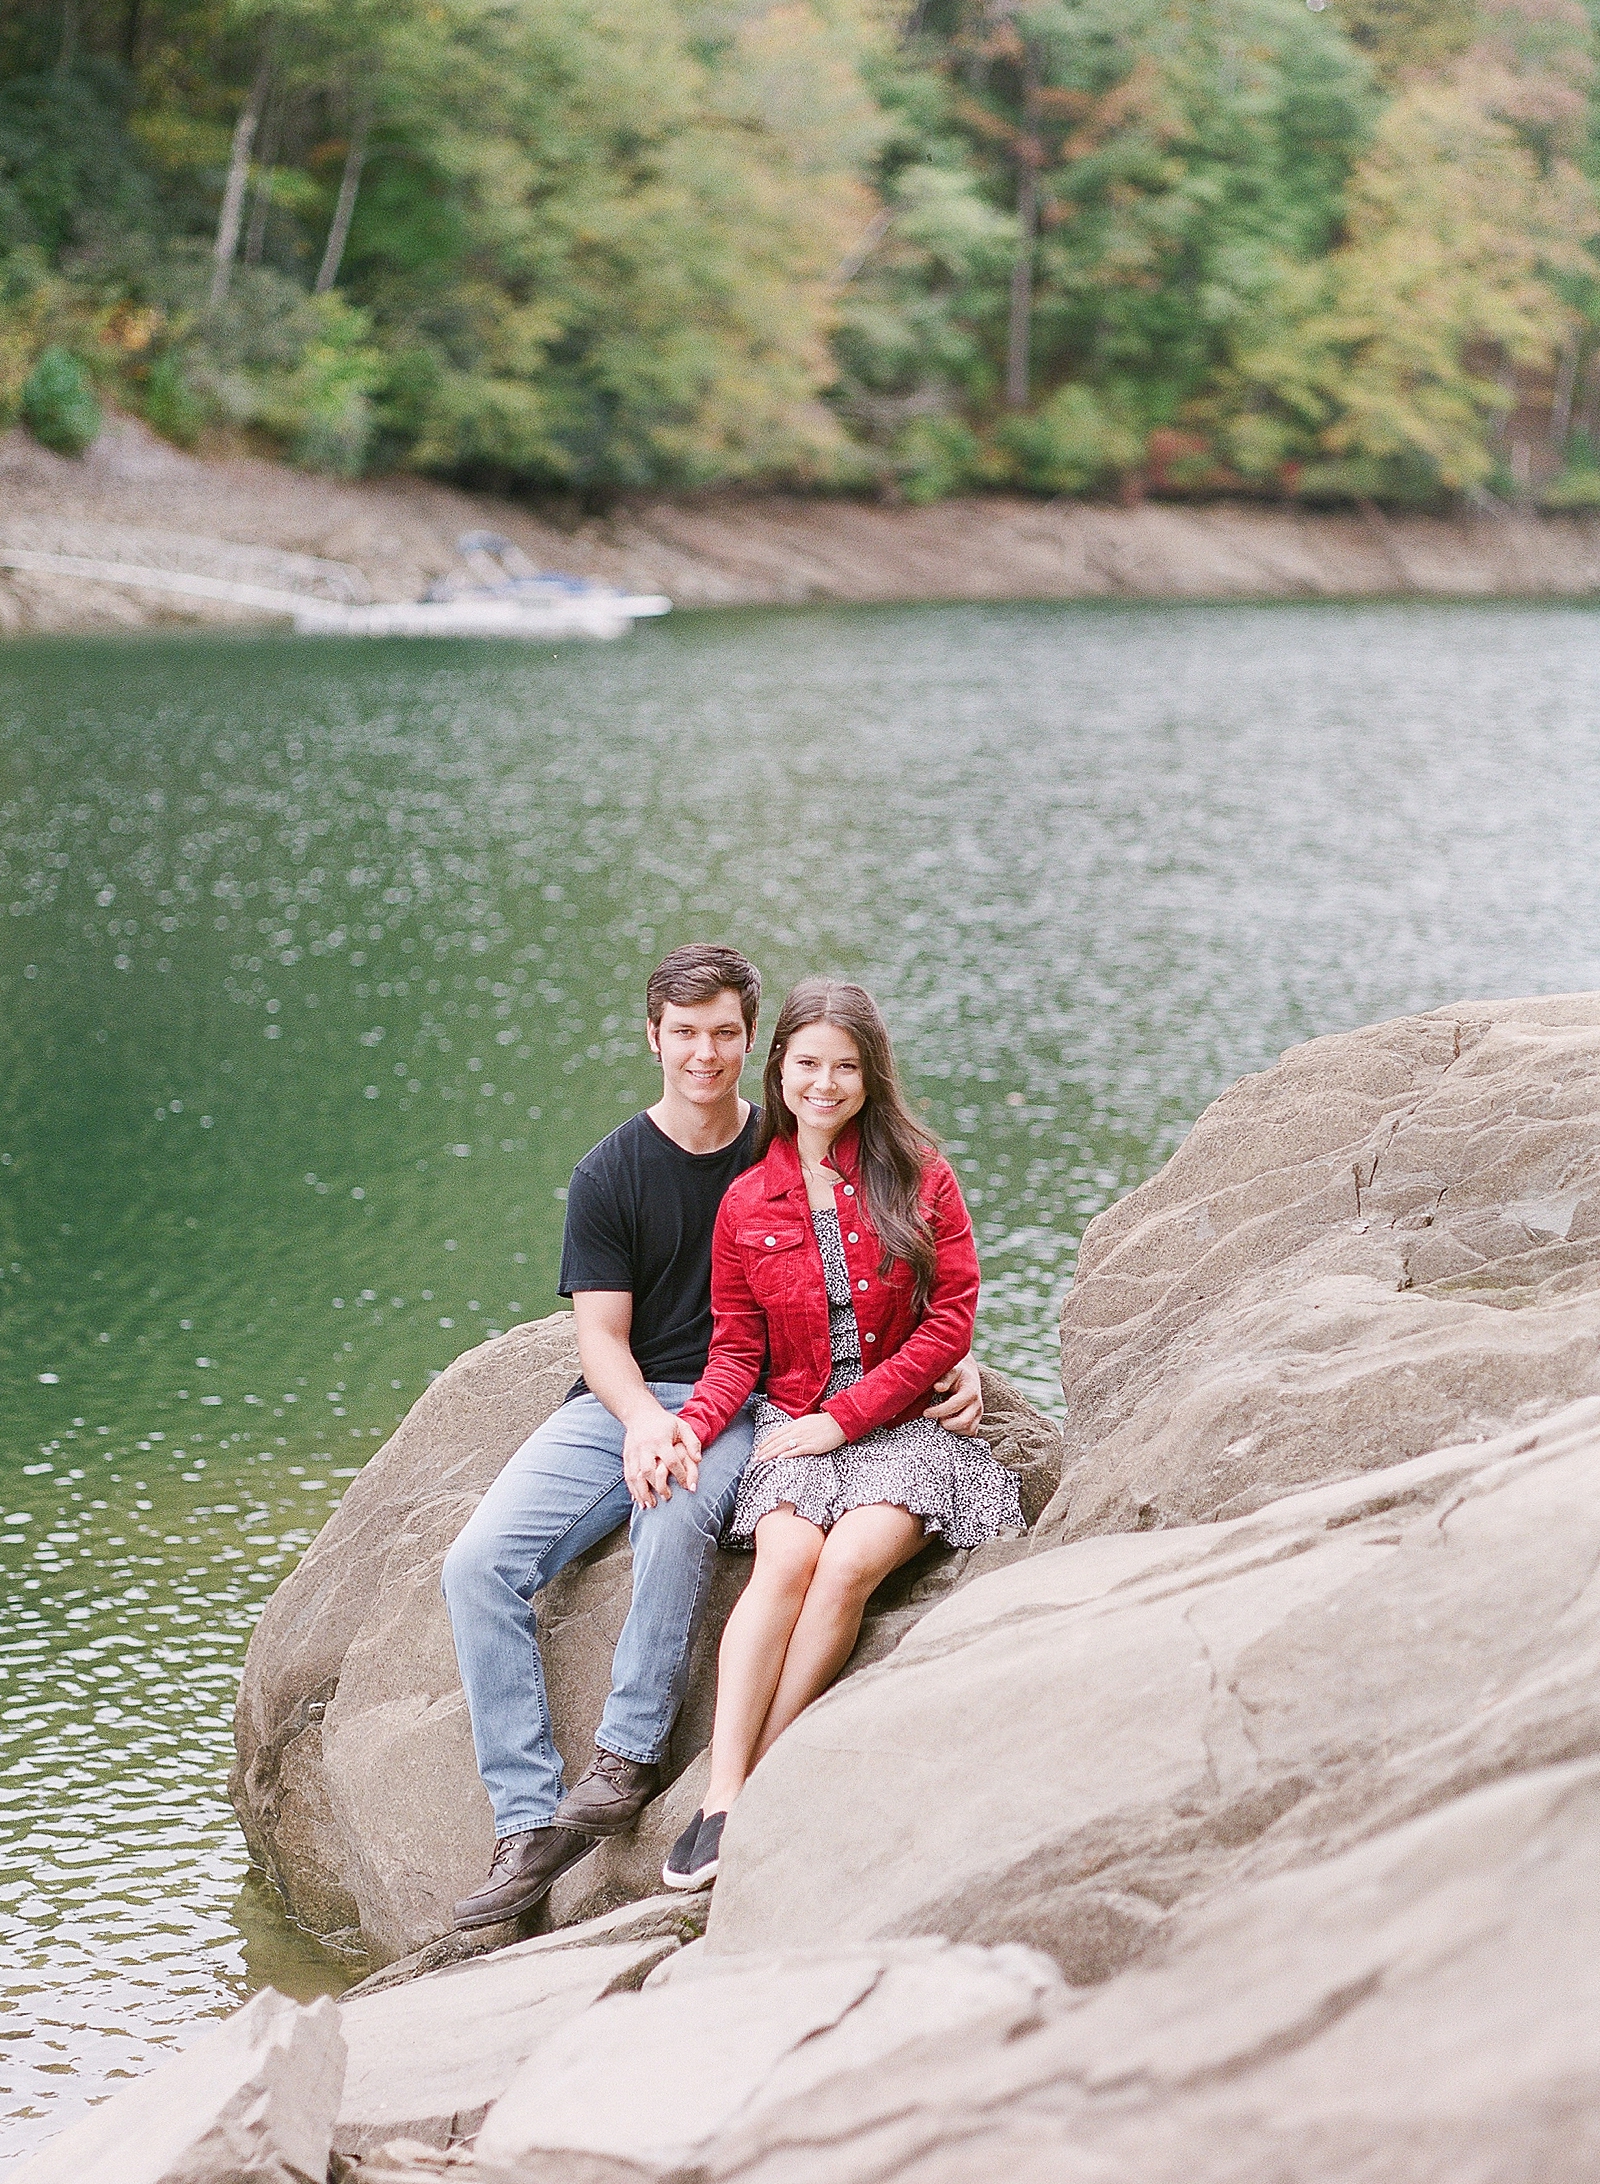 Mountaintop Engagement Couple Smiling at Camera sitting on rocks Photo 